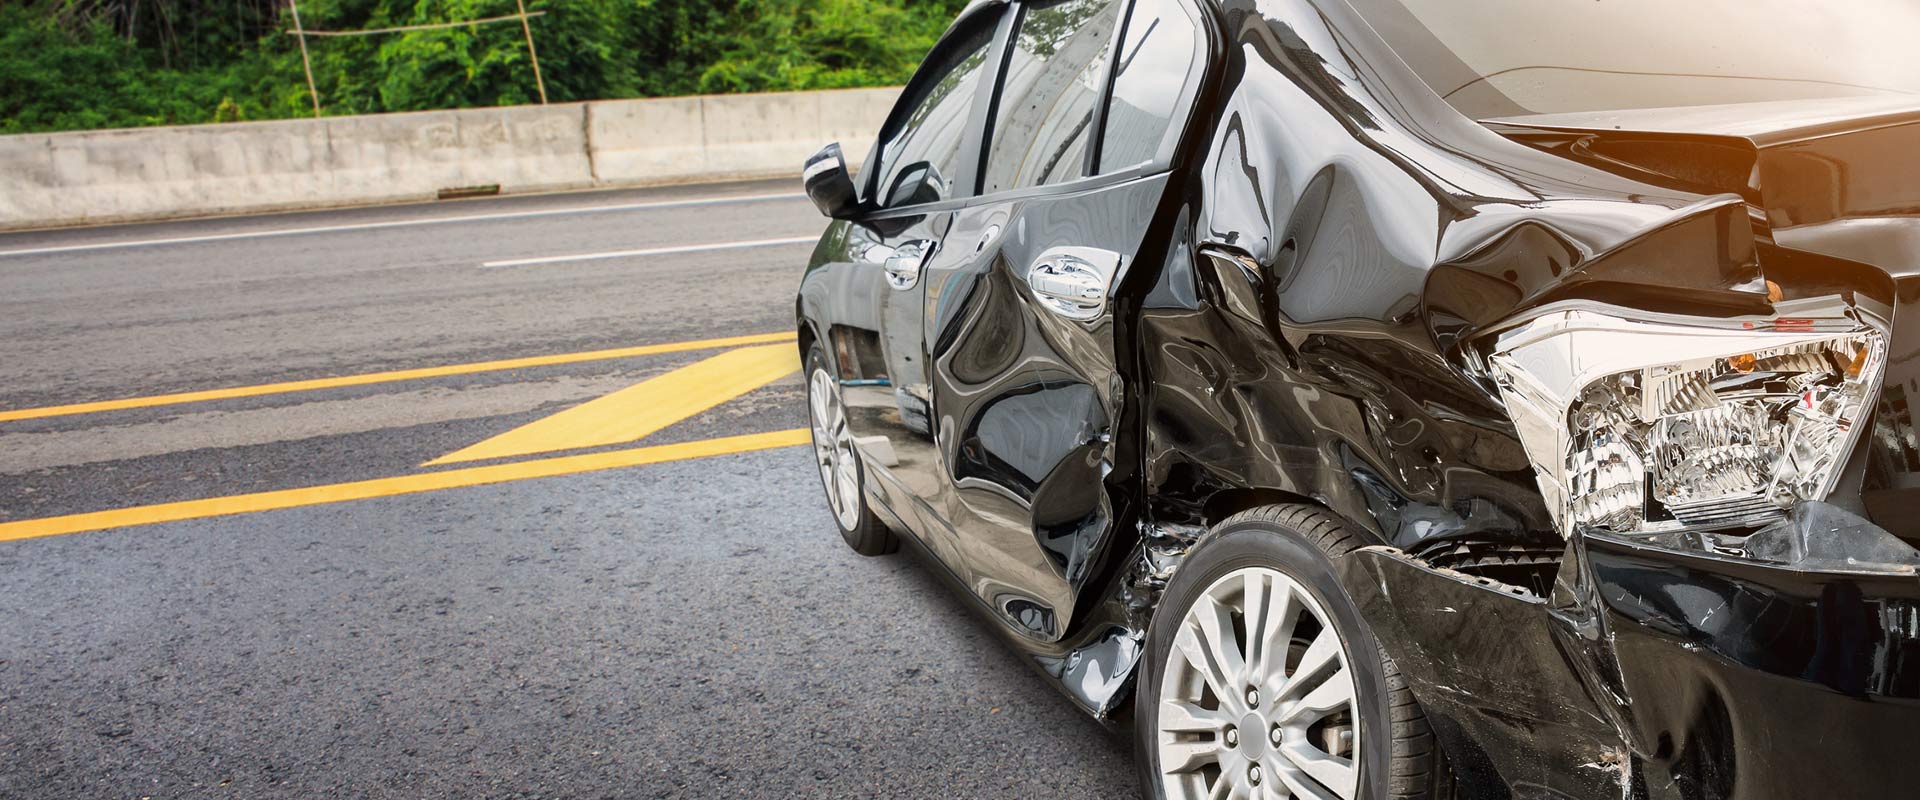 Crazy Holiday Car Crashes – Could these happen to you?